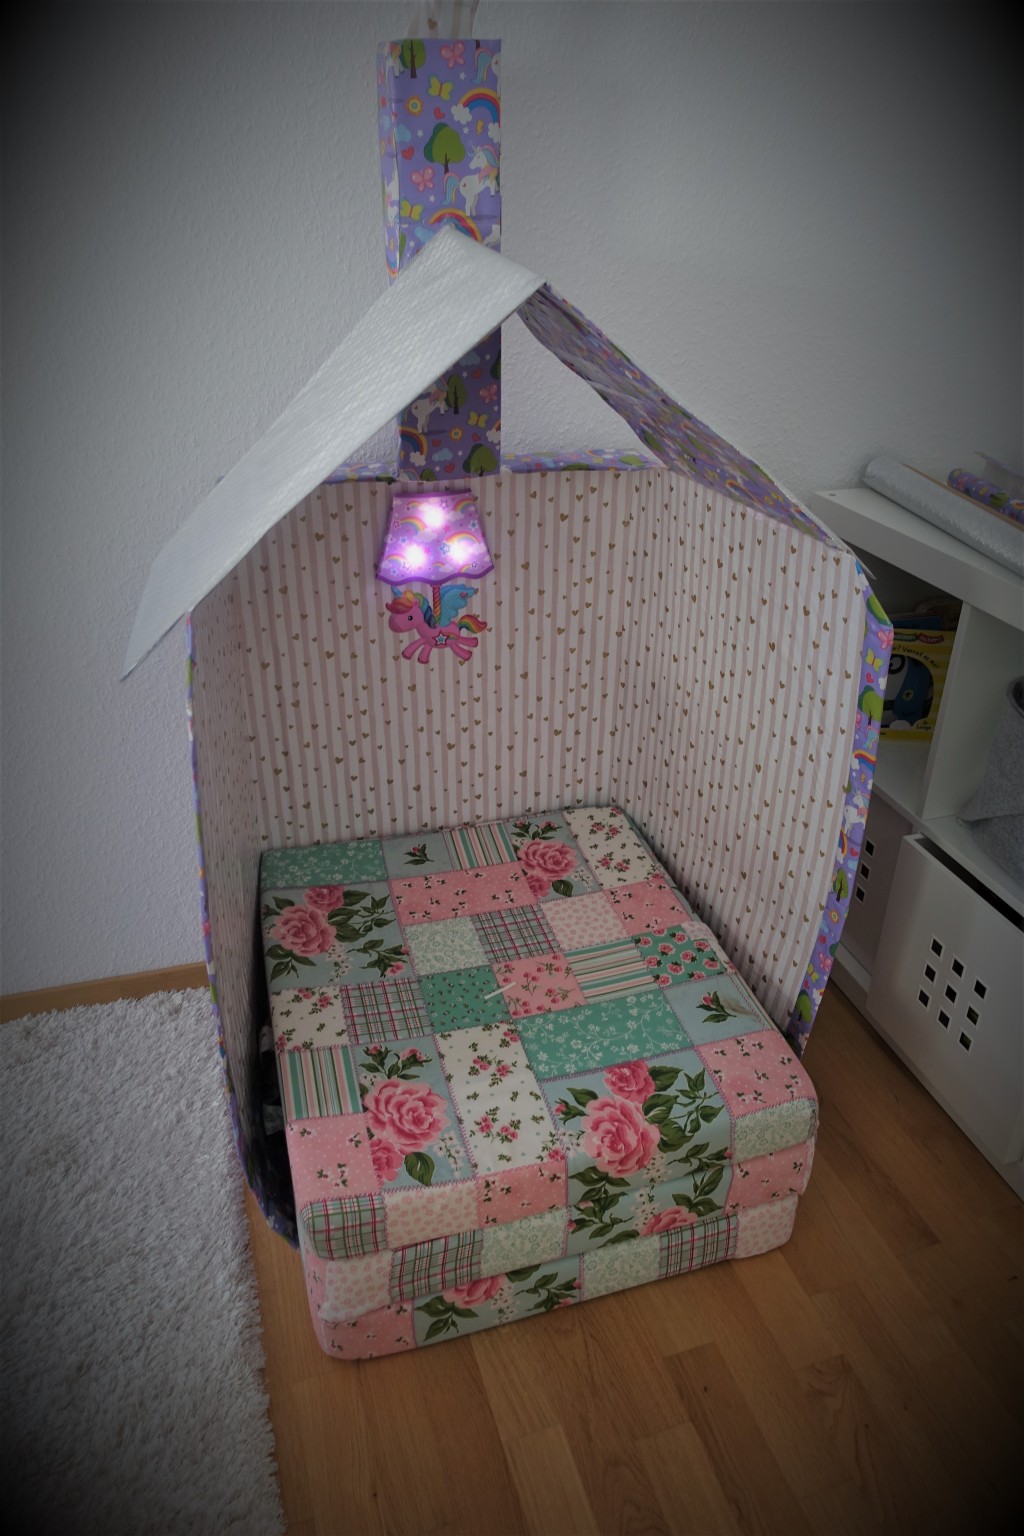 The final cardboard playhouse with a little lamp in the middle